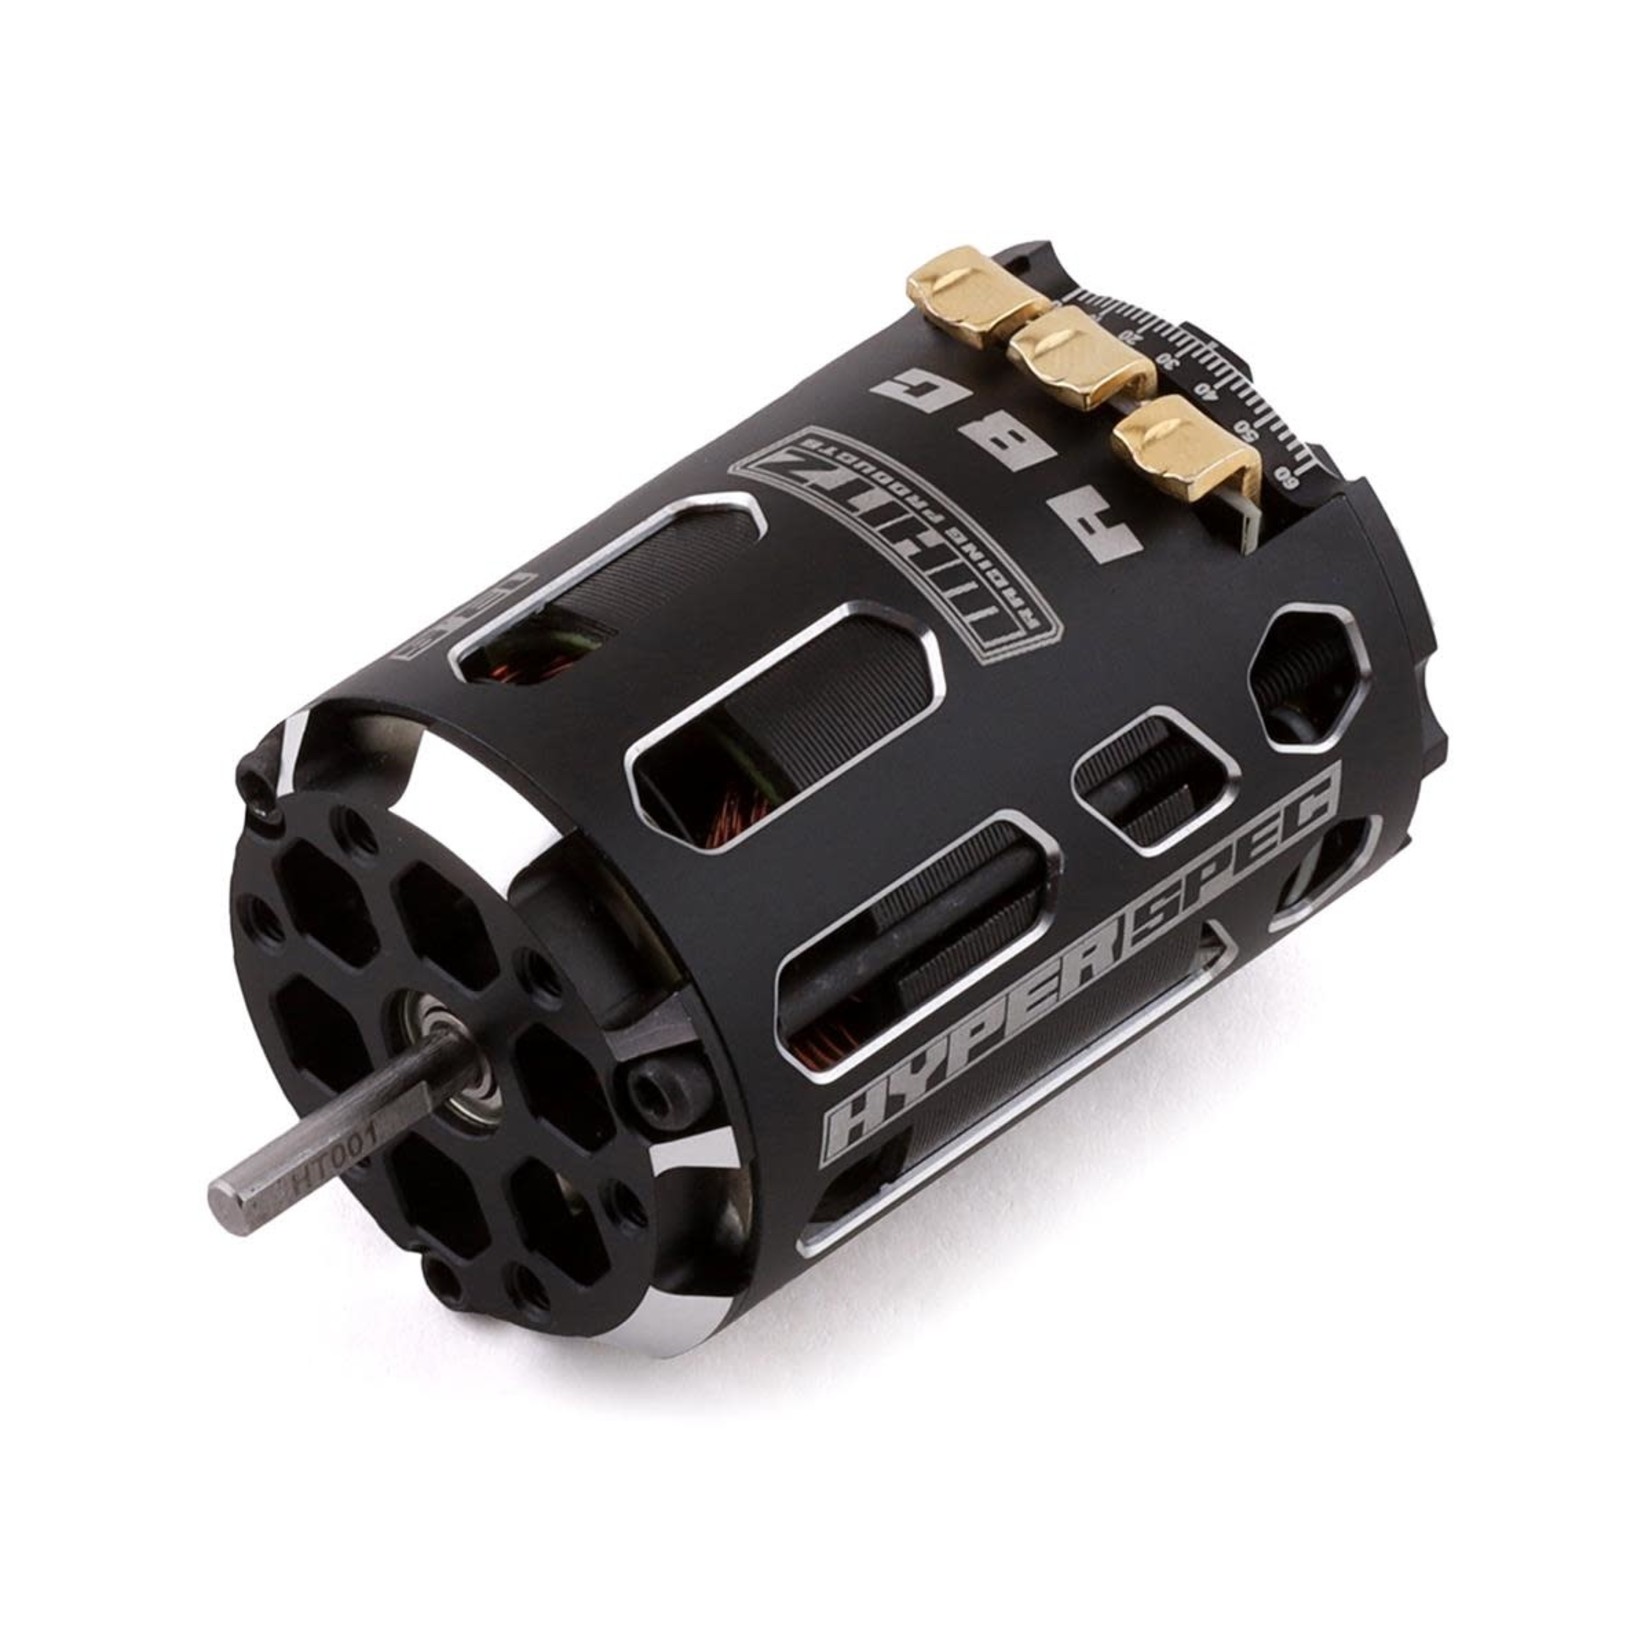 Whitz Racing Products Whitz Racing Products HyperSpec Competition Stock Sensored Brushless Motor (21.5T) #WRP-HS-215